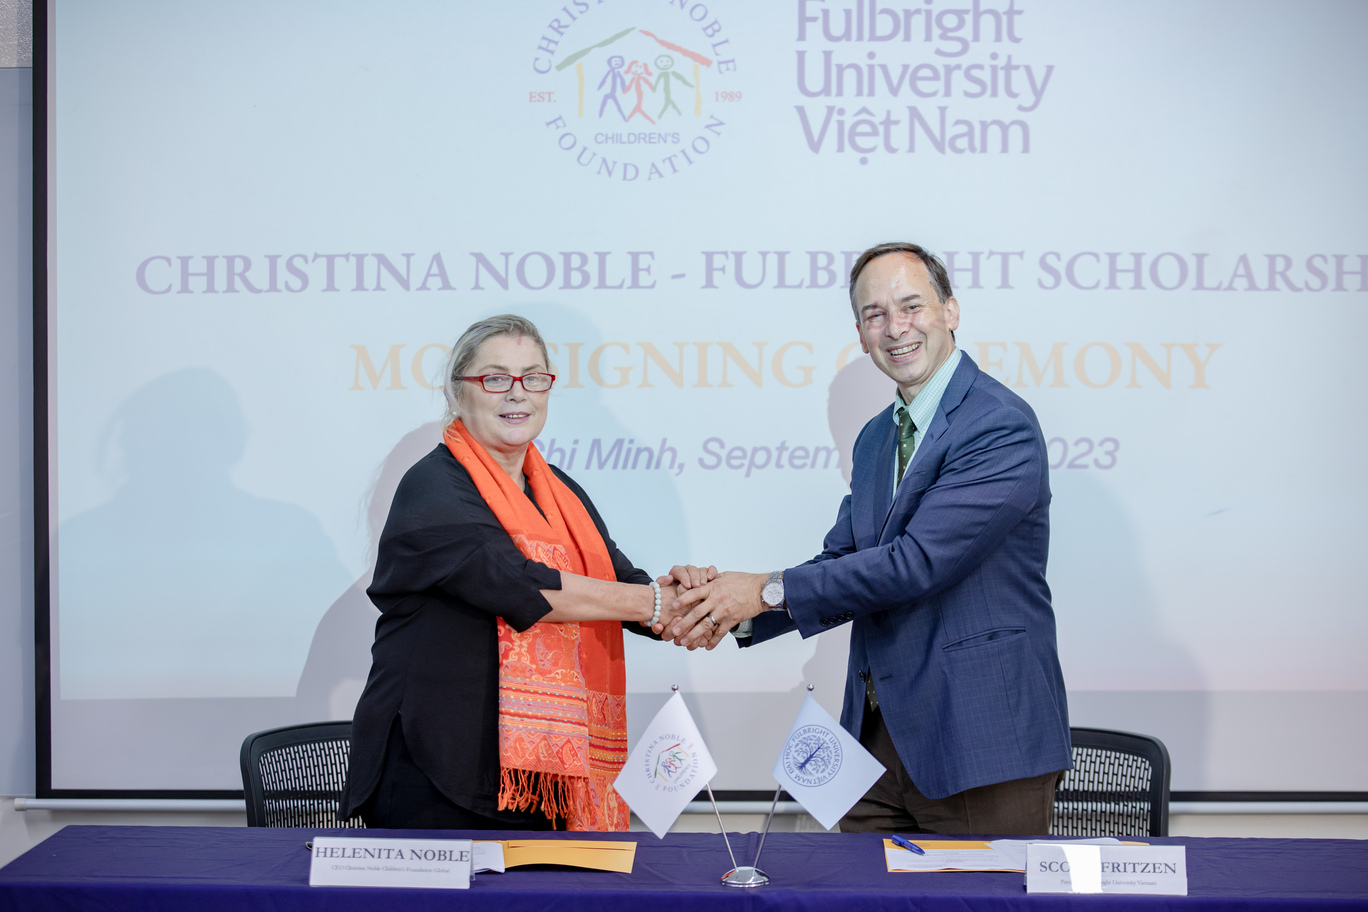 Fulbright University Vietnam and Christina Noble Children’s Foundation (CNCF) signed an MOU to award seven students of the Class of 2027 with scholarships towards their college living costs.